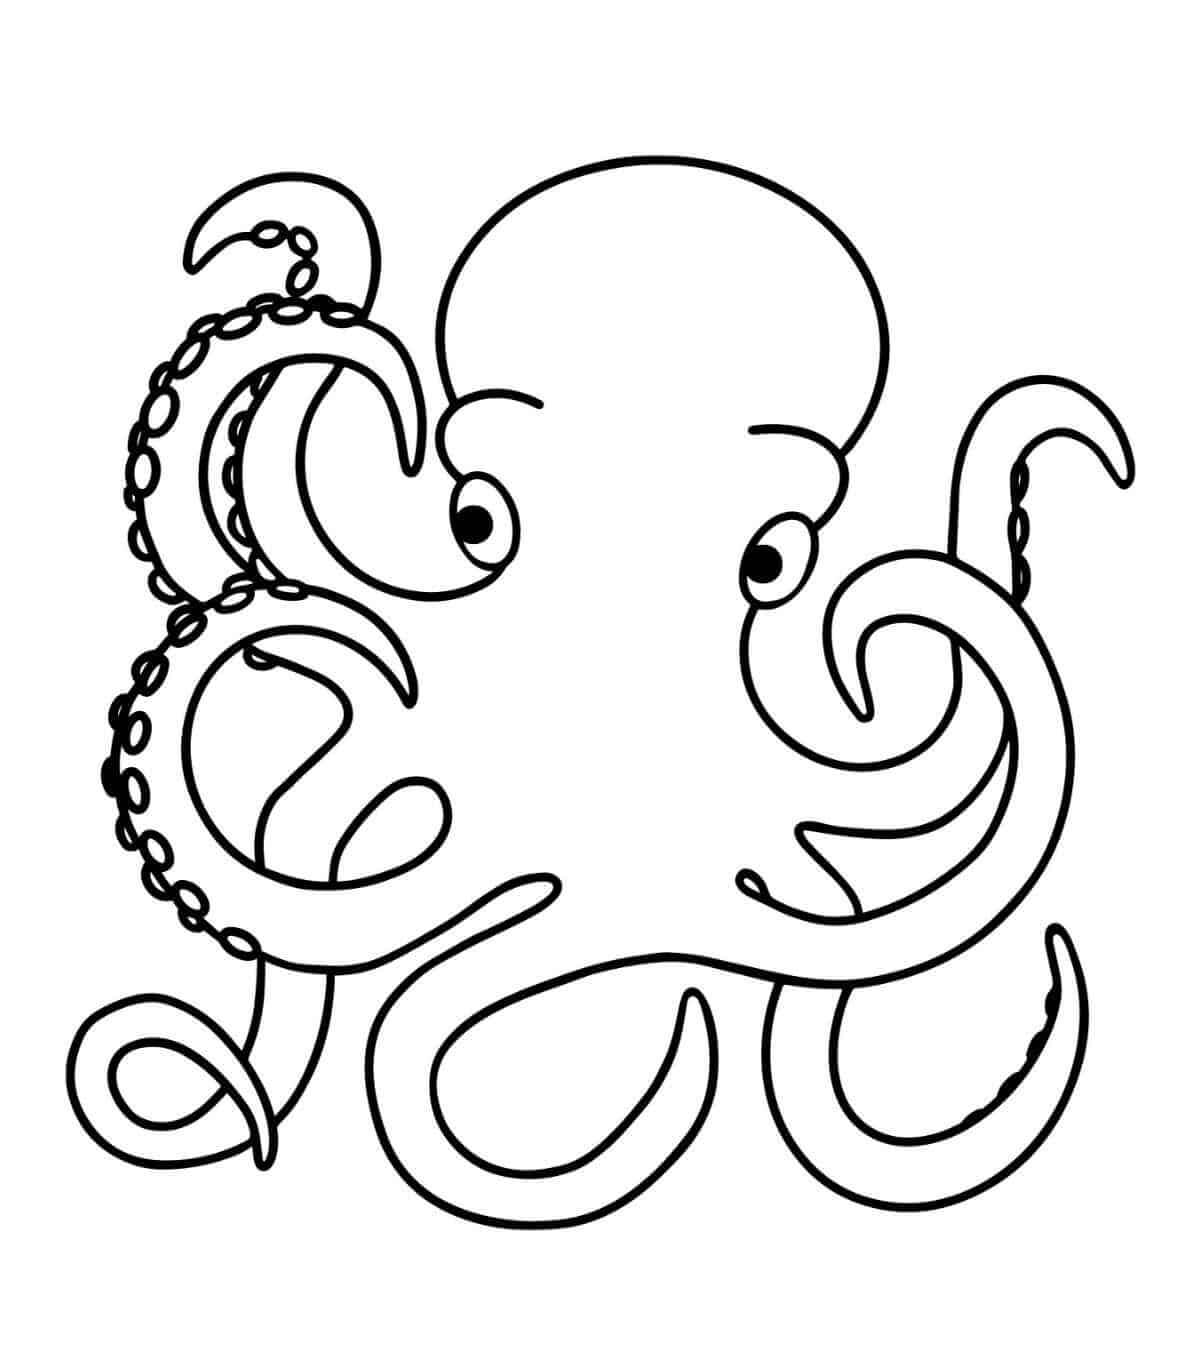 Free Printable Octopus coloring page - Download, Print or Color Online ...